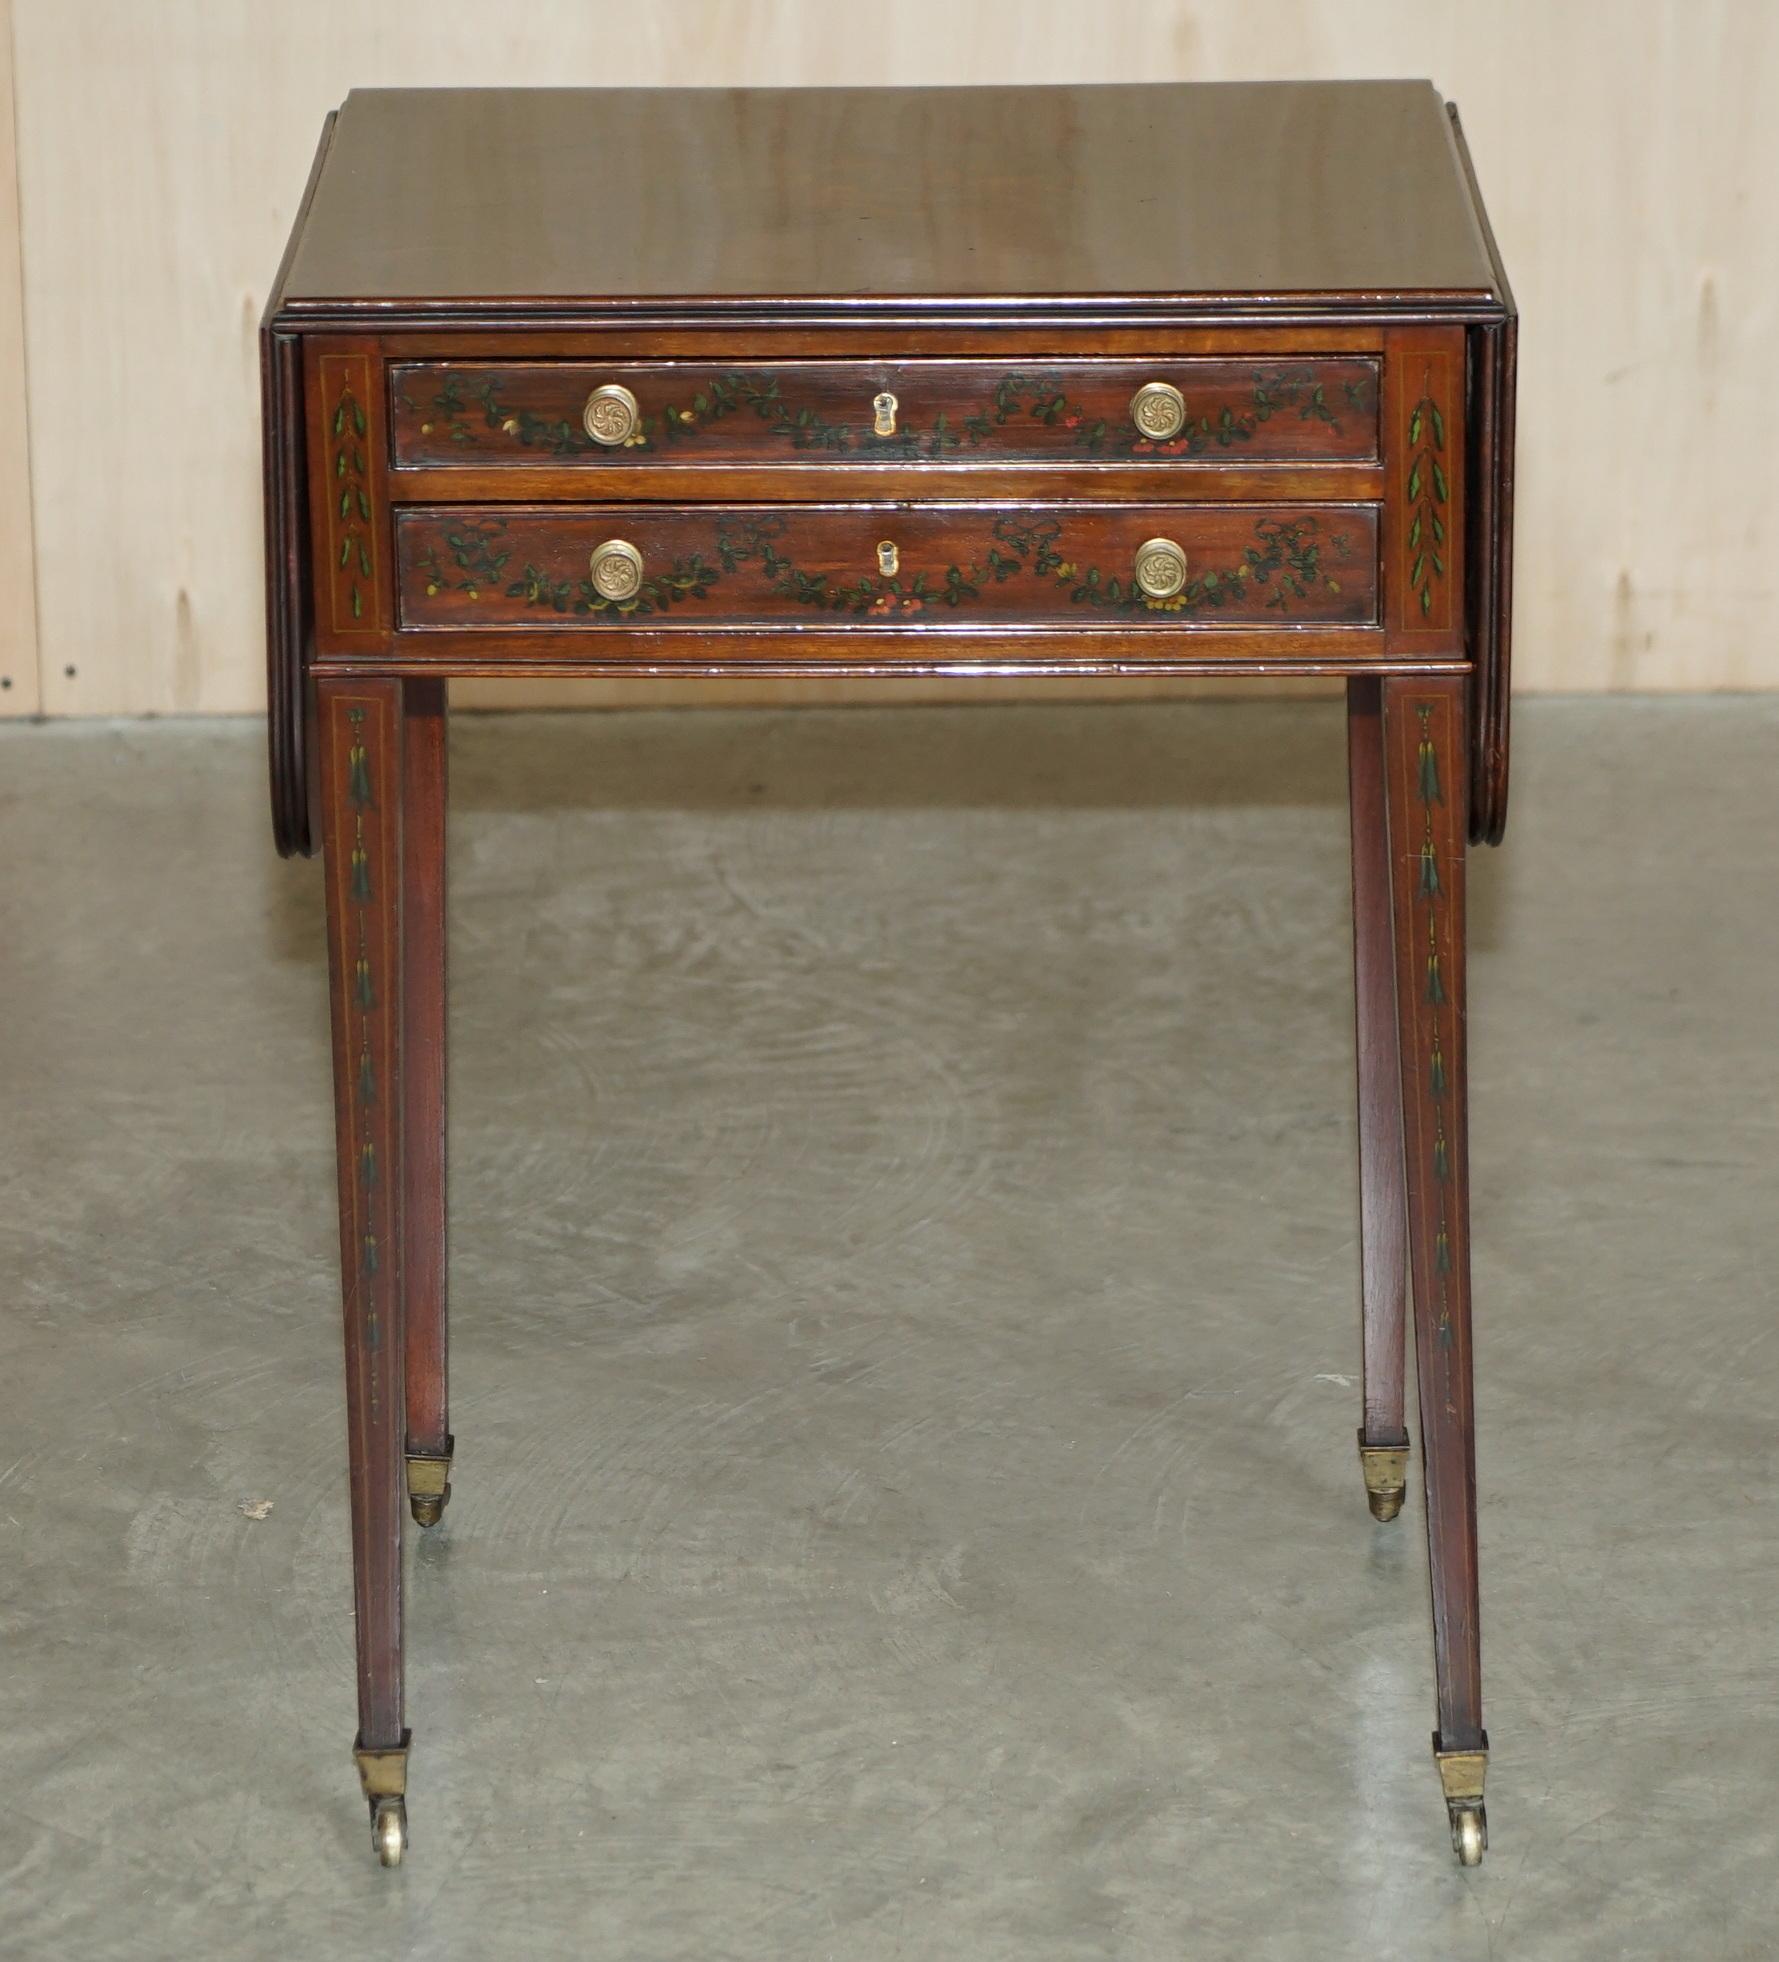 English Antique Regency circa 1815 Sheraton Hand Painted Cherub Extending Side End Table For Sale